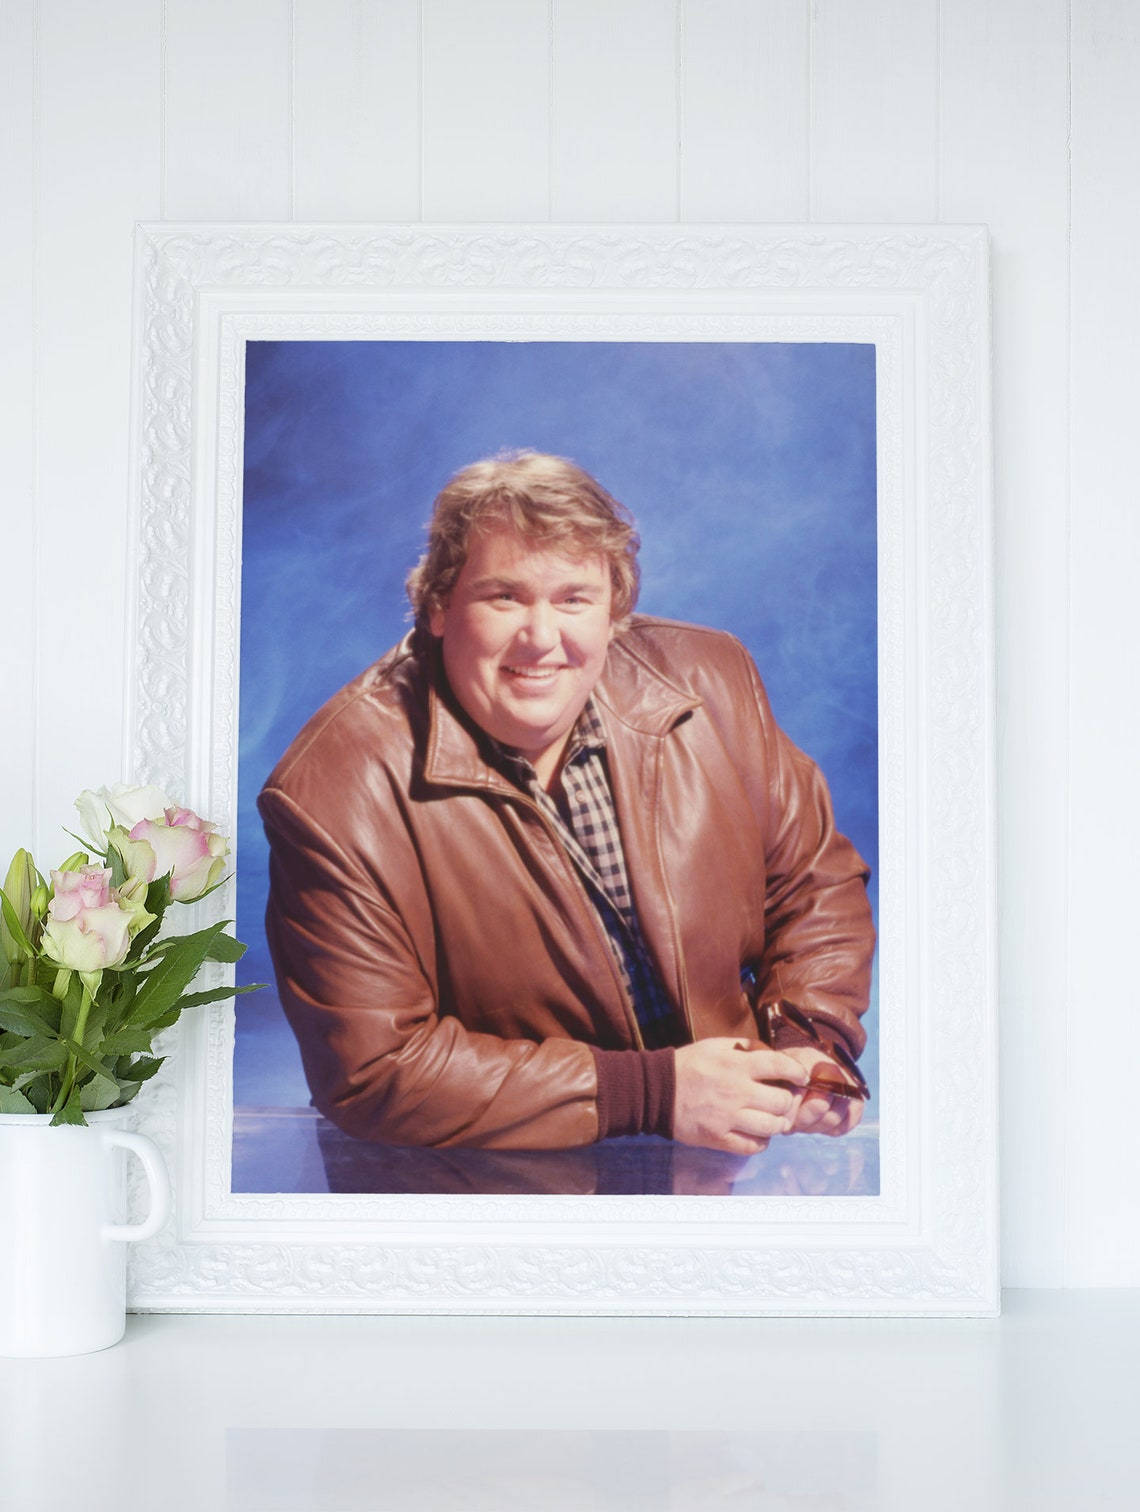 Outstanding Comedian John Candy In Frame Background